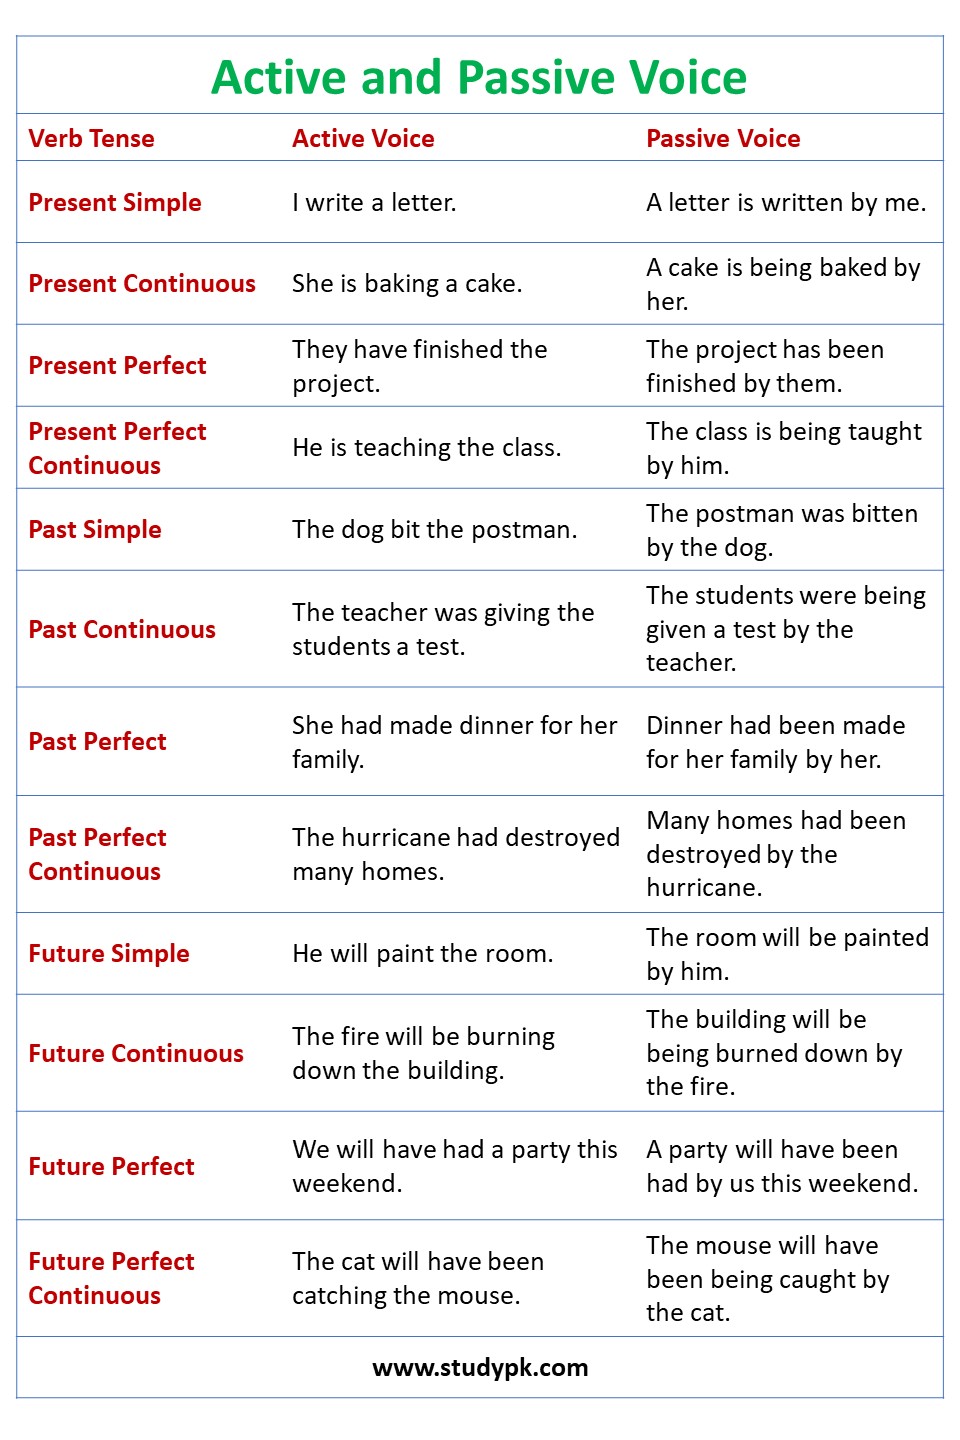 Examples of Active and Passive Voice in Different Verb Tenses